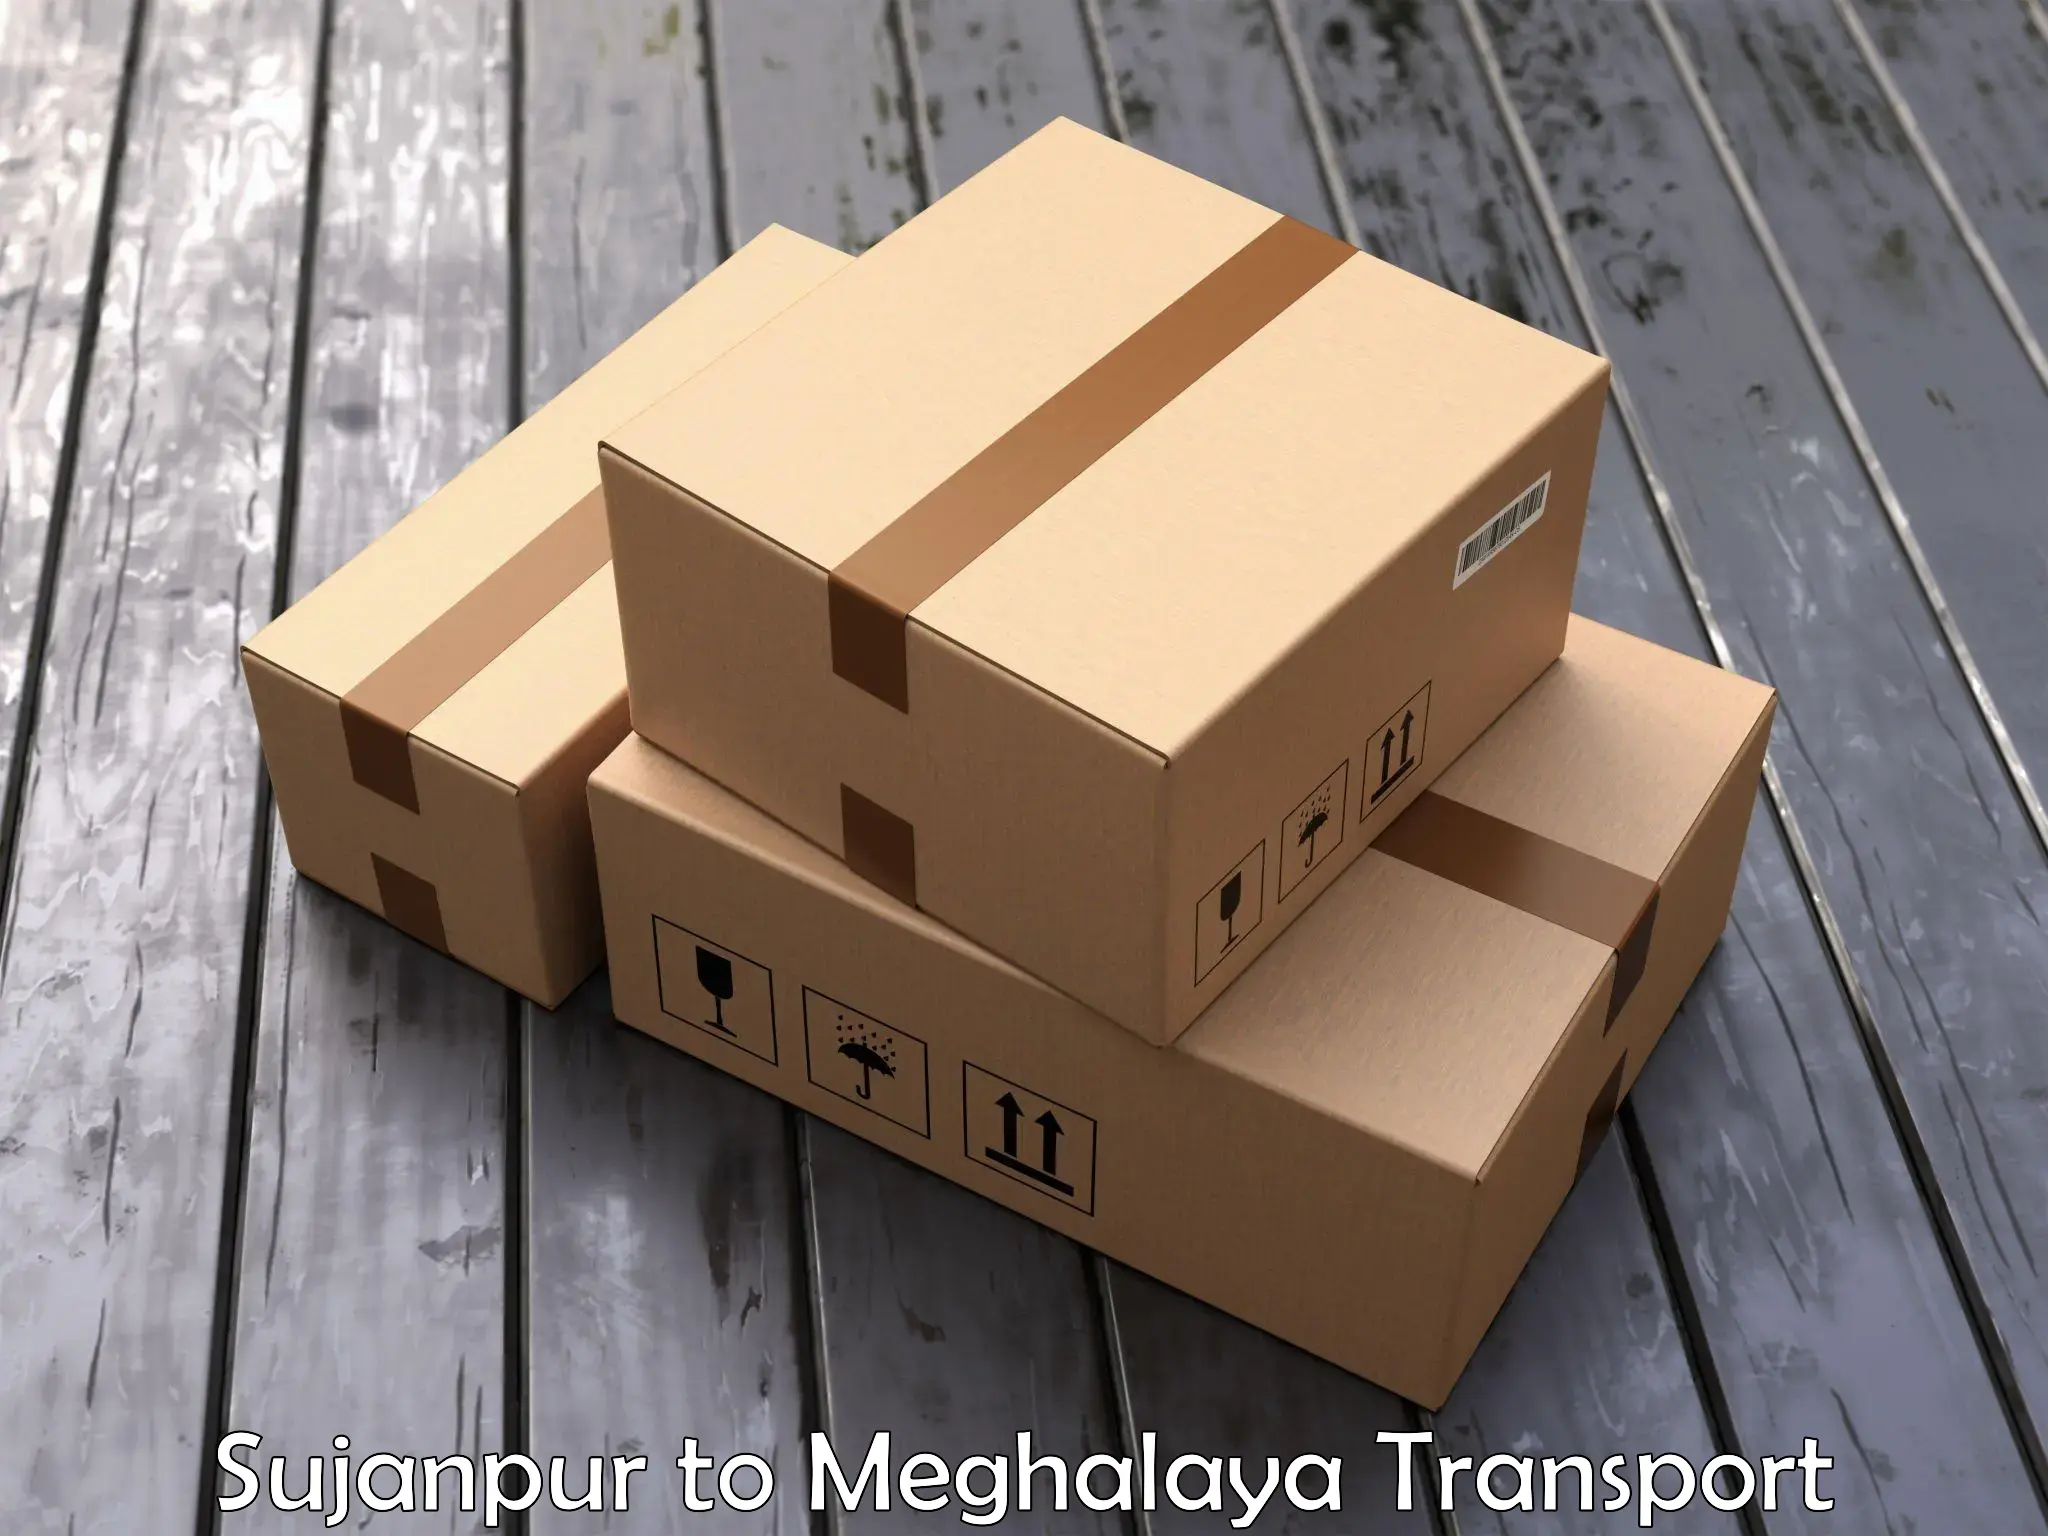 Bike shipping service Sujanpur to Dkhiah West